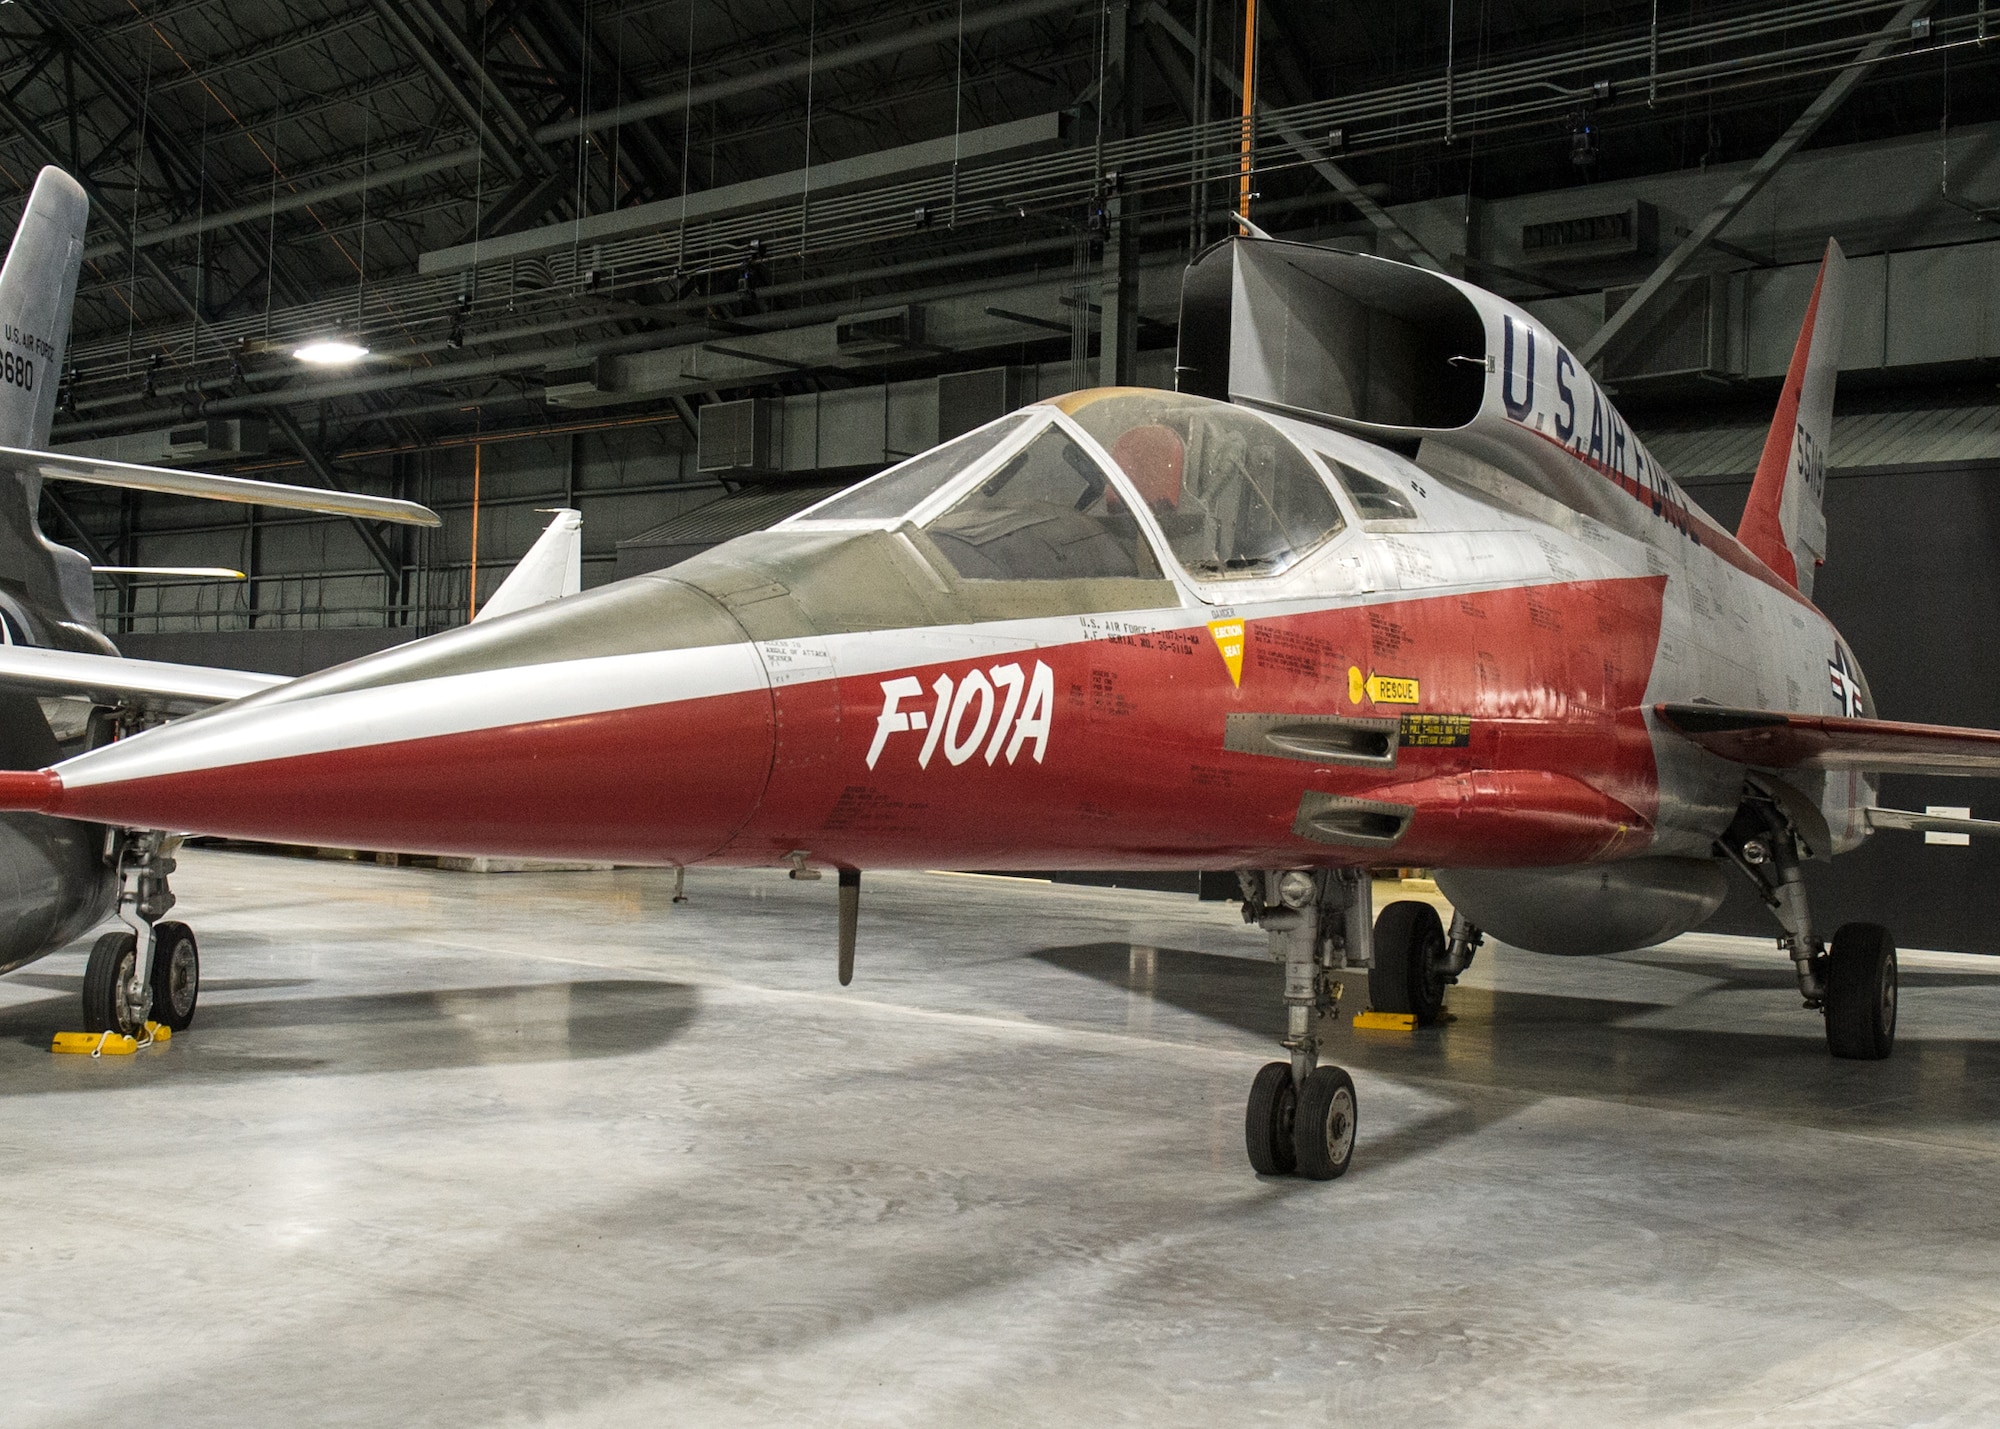 North American F-107A in the Research & Development Gallery at the National Museum of the U.S. Air Force on December 28, 2015. (U.S. Air Force photo)